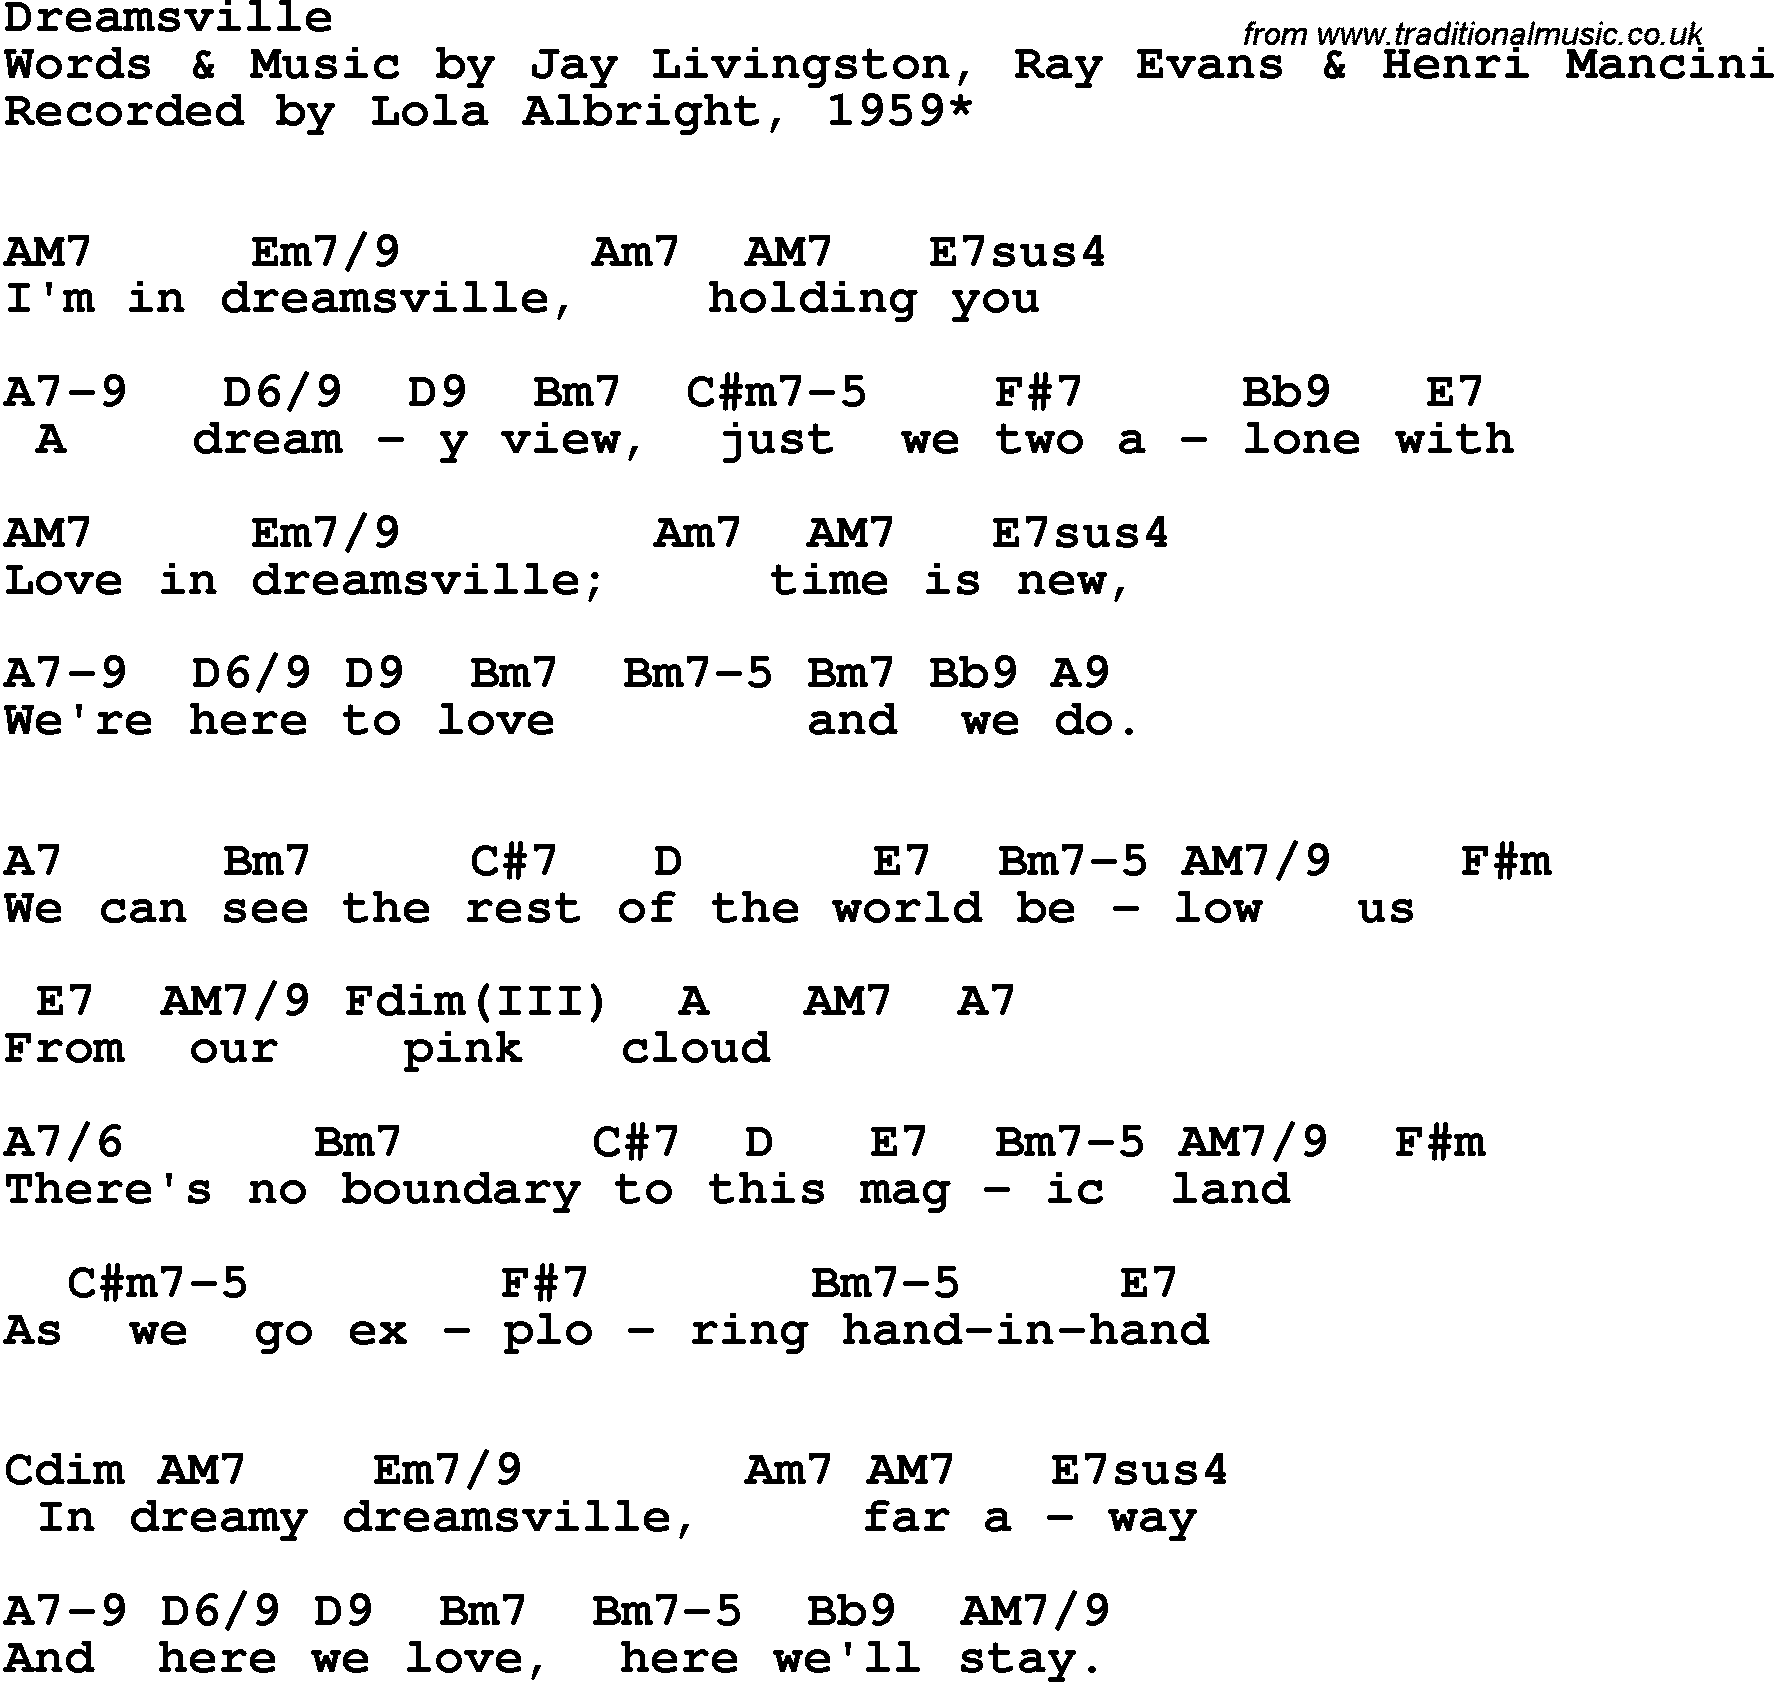 Song Lyrics with guitar chords for Dreamsville - Lola Albright, 1959